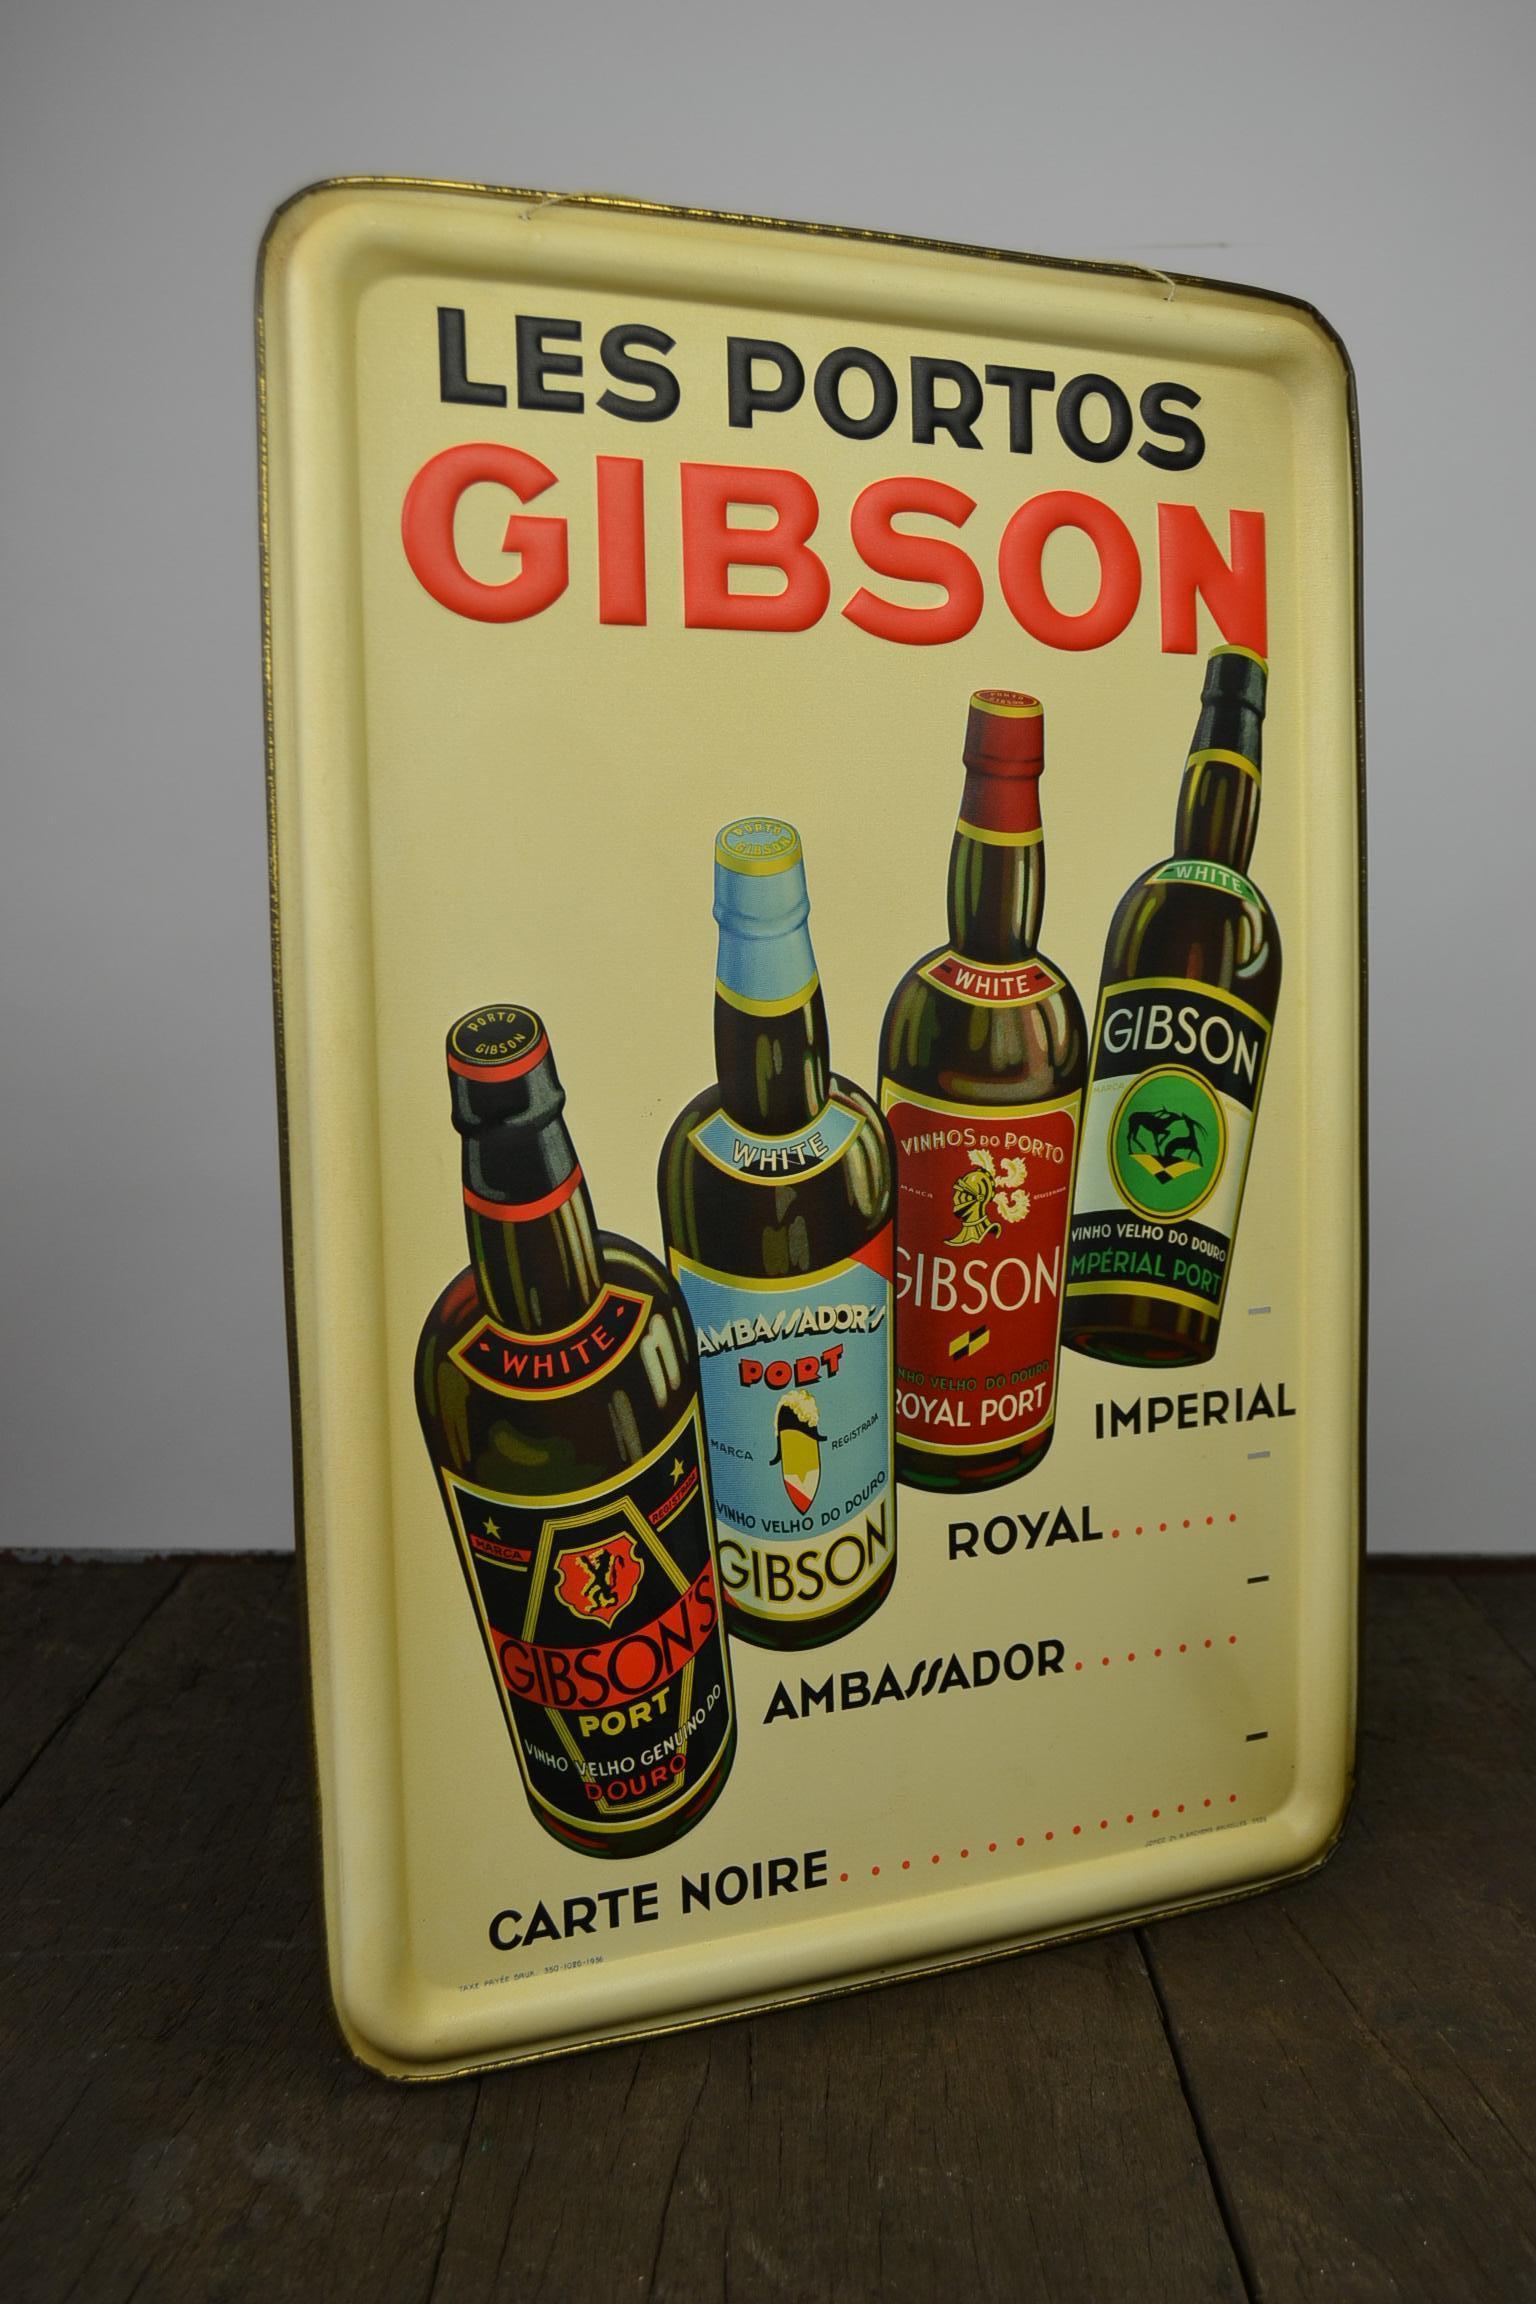 1936 Tin Sign for Les Portos Gibson, Appetizer Drink 7